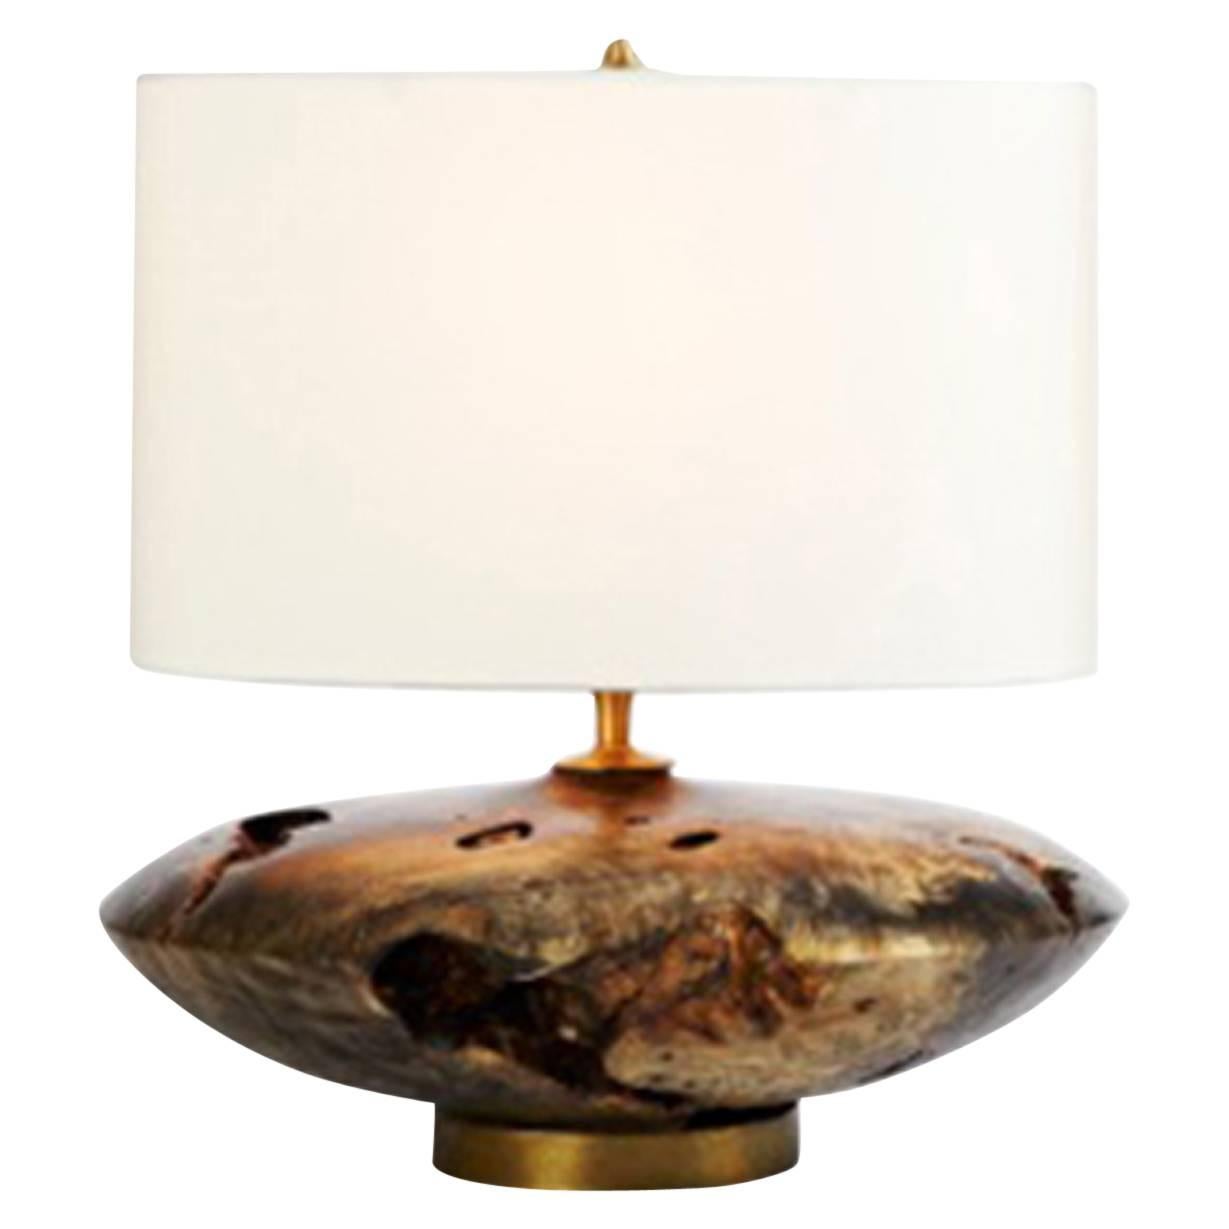 Kriest Aesculus Wood "Offering Major" Table Lamp with White Linen Shade For Sale